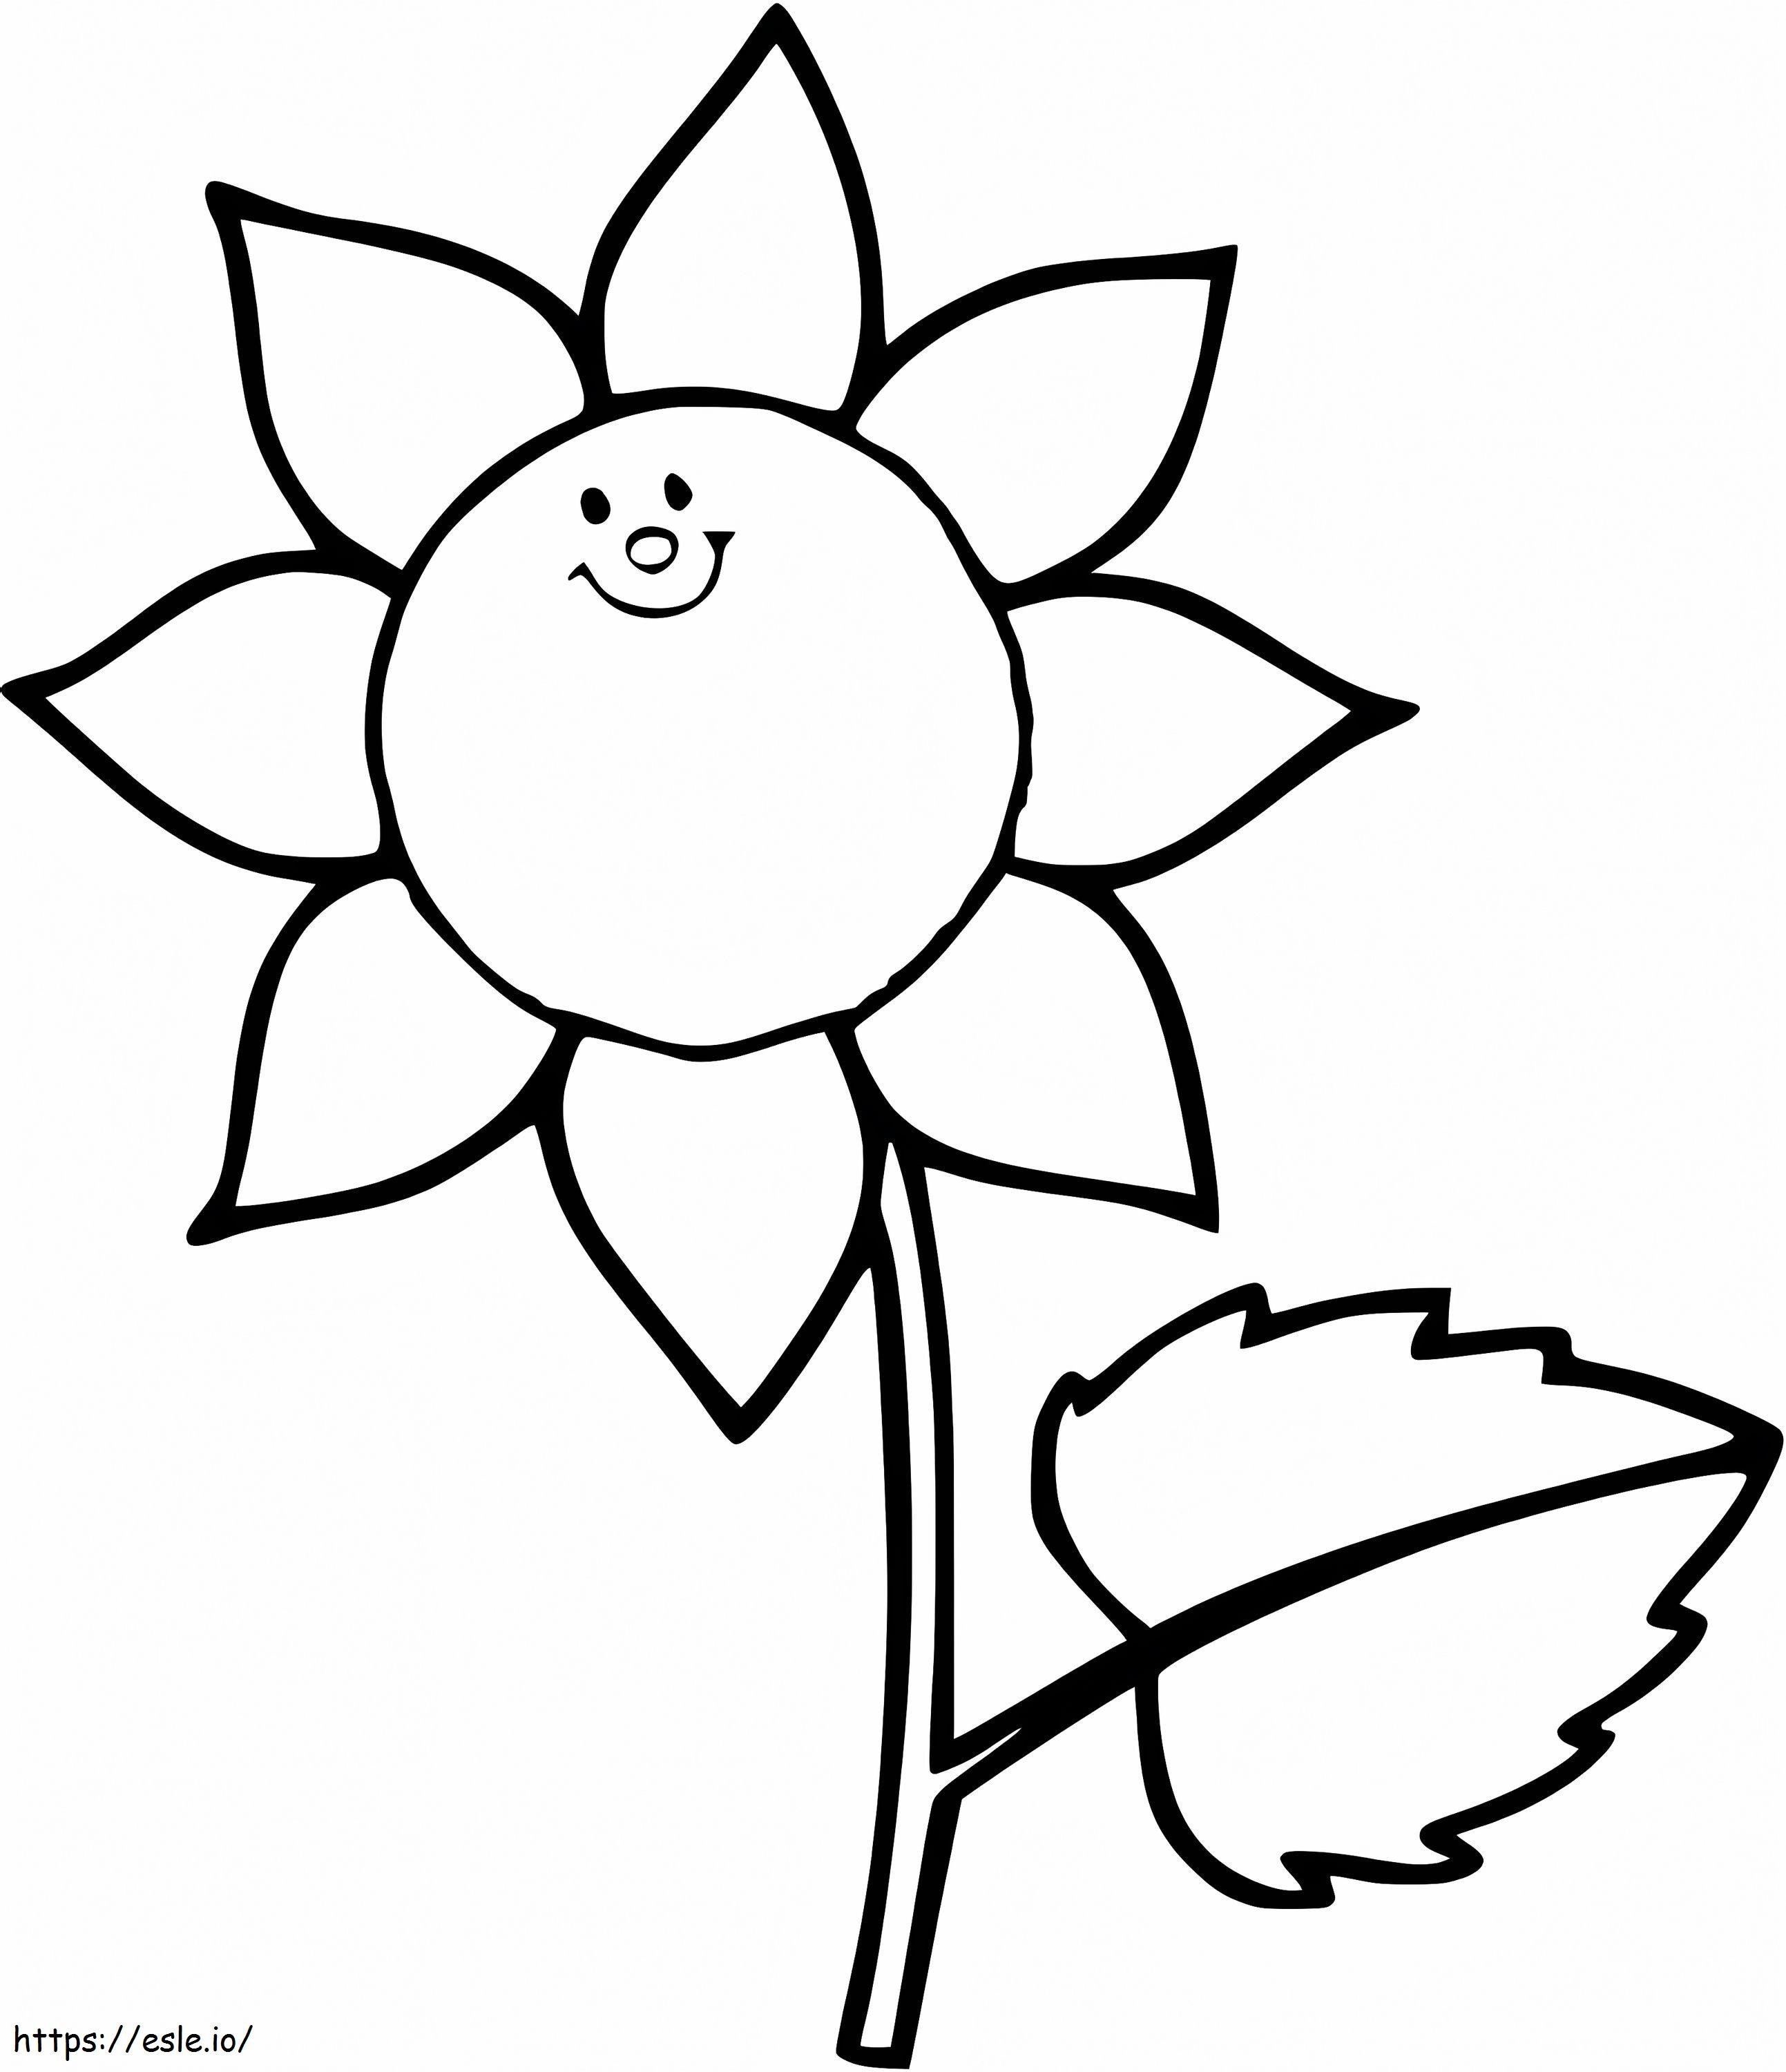 Cartoon Sunflower coloring page